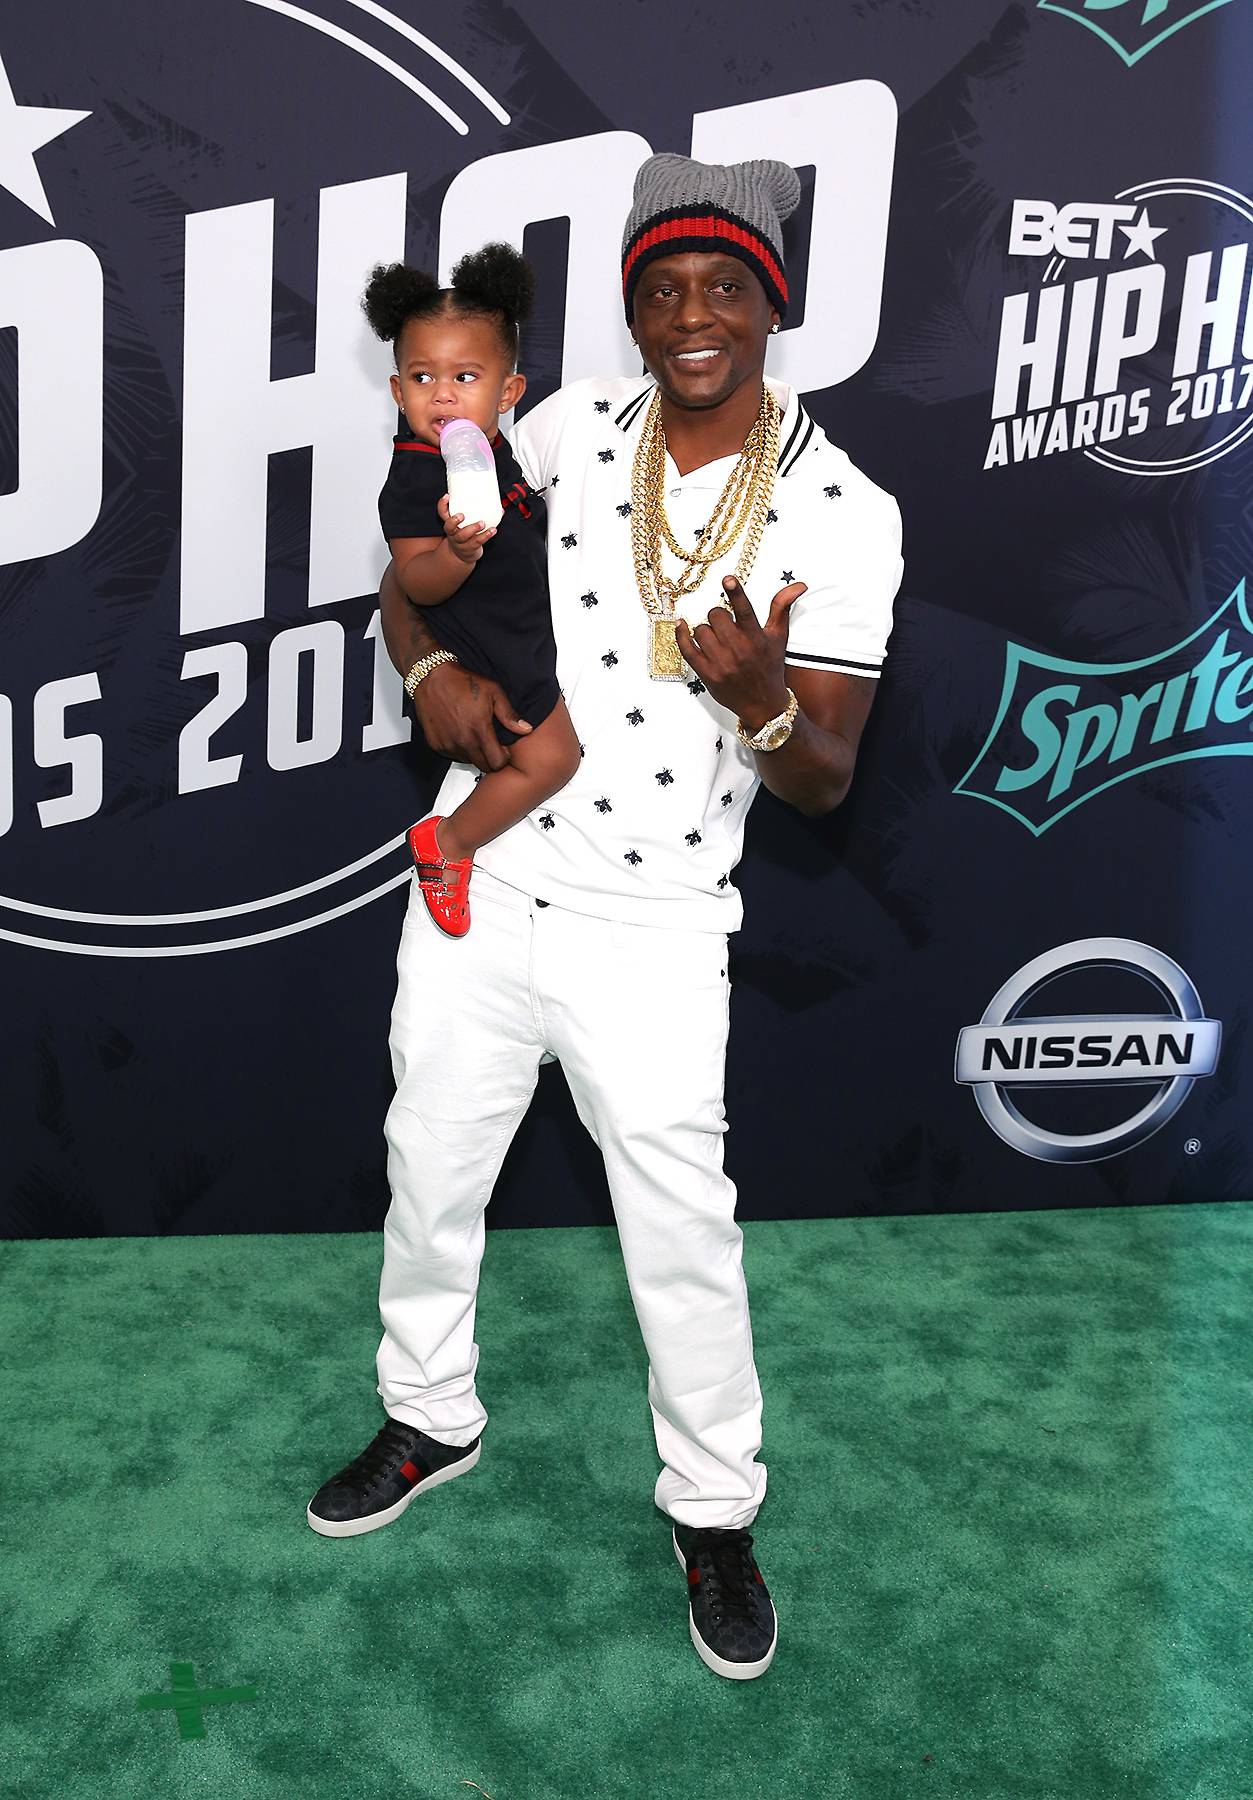 Boosie In The Building! Image 28 from Hip Hop Awards All Access To